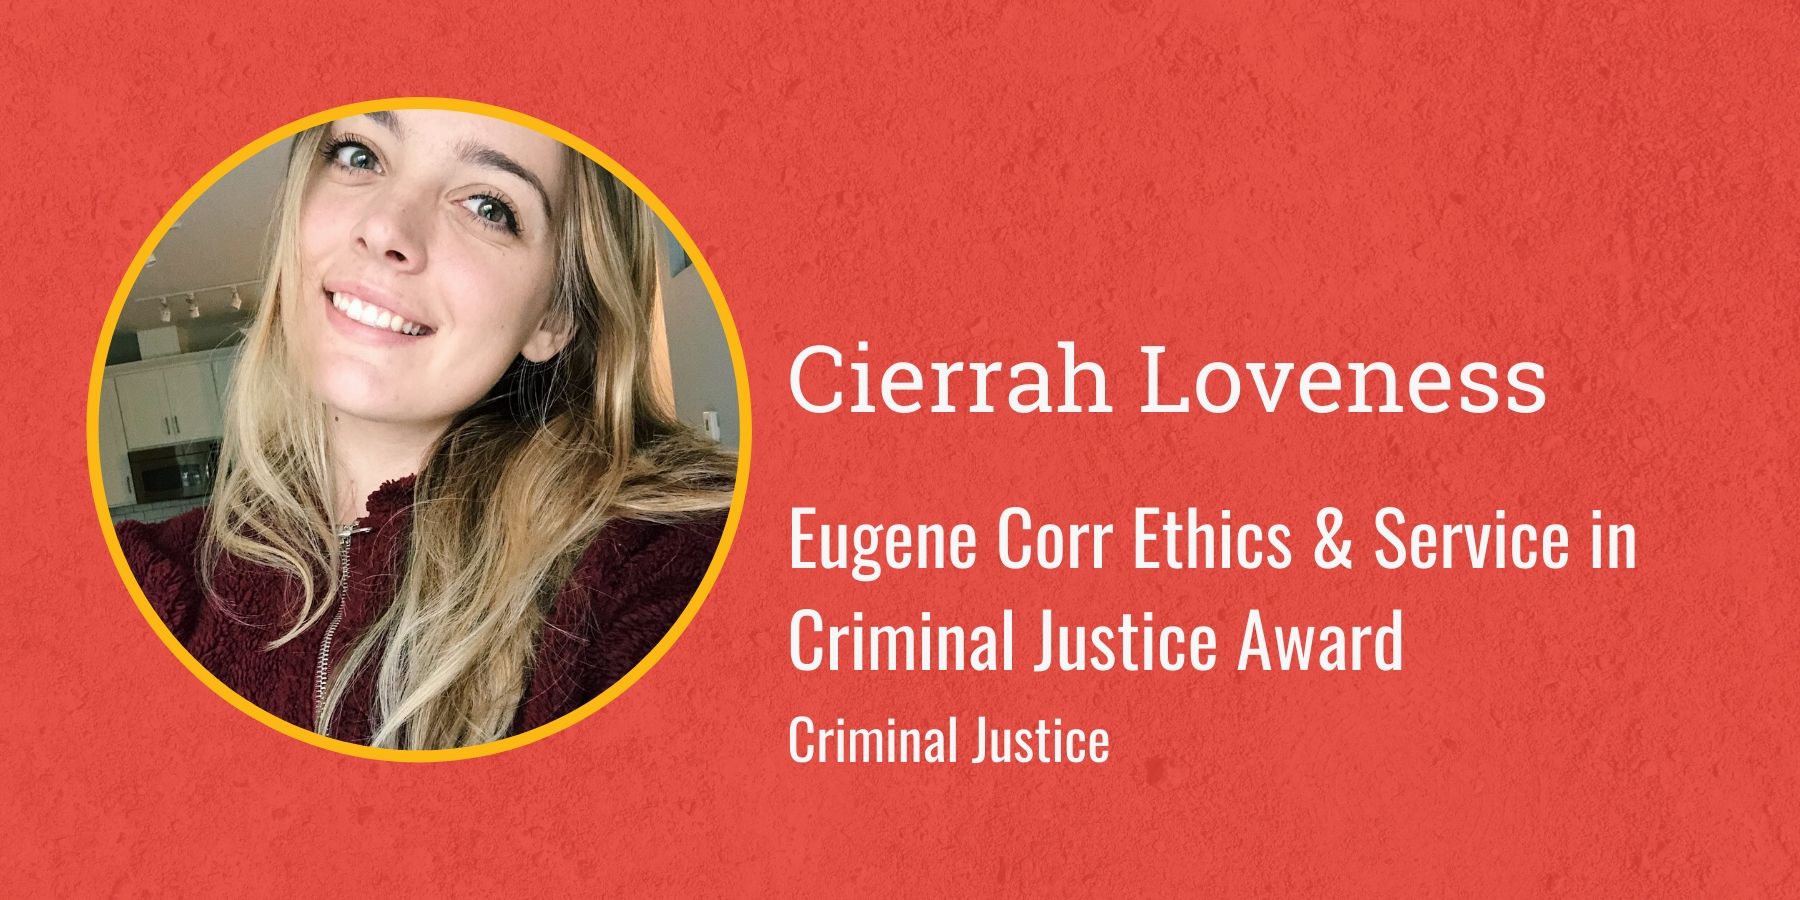 Photo of Cierrah Loveness and text Eugene Corr Ethics & Service in Criminal Justice Award
